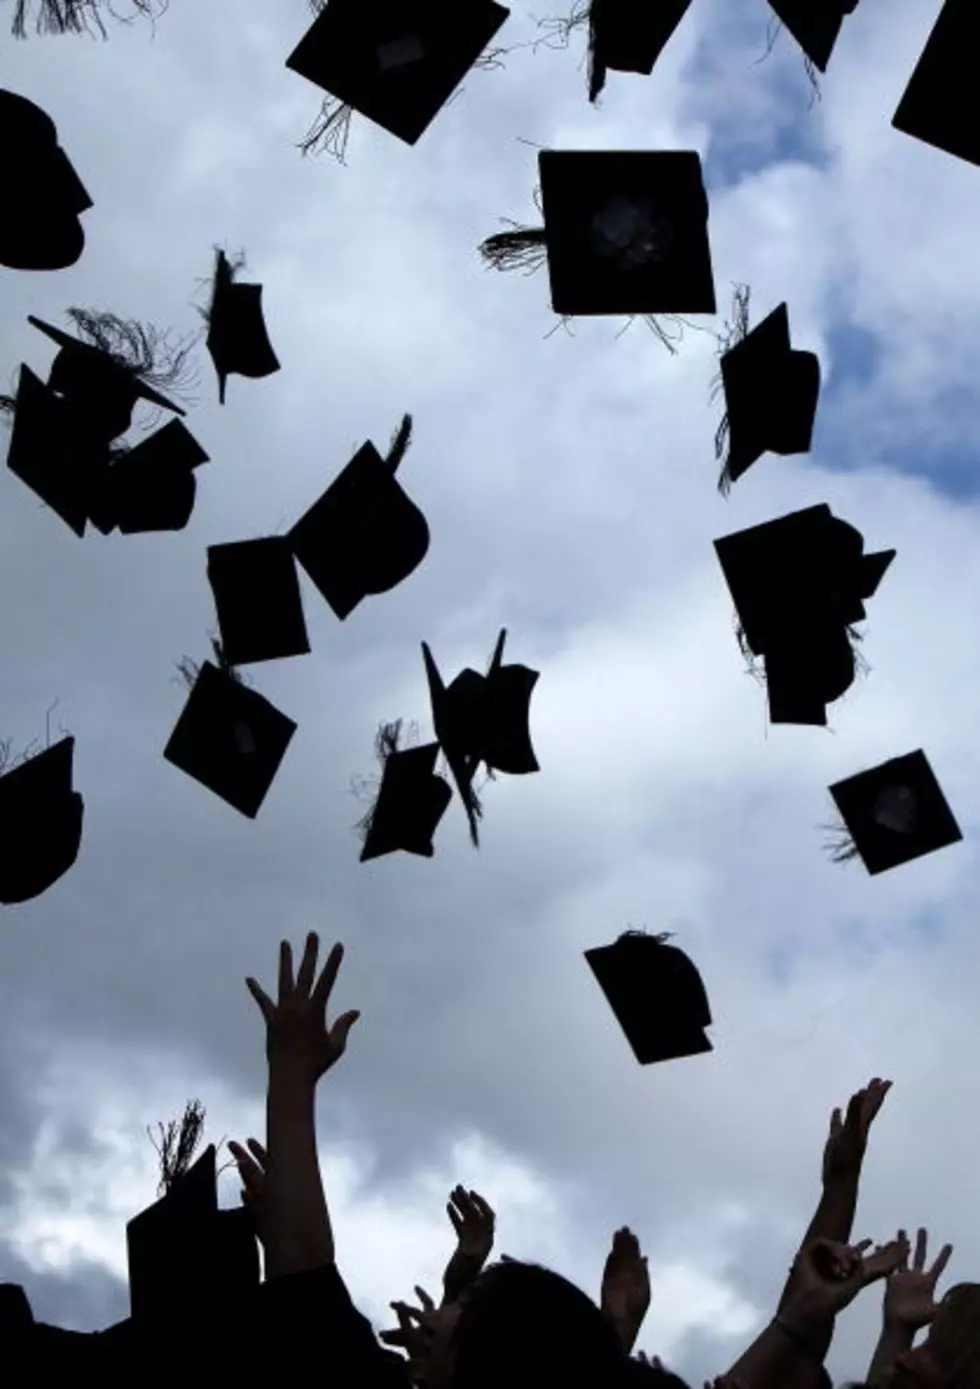 Students Denied Diplomas After Tossing Graduation Caps In Air [VIDEO]